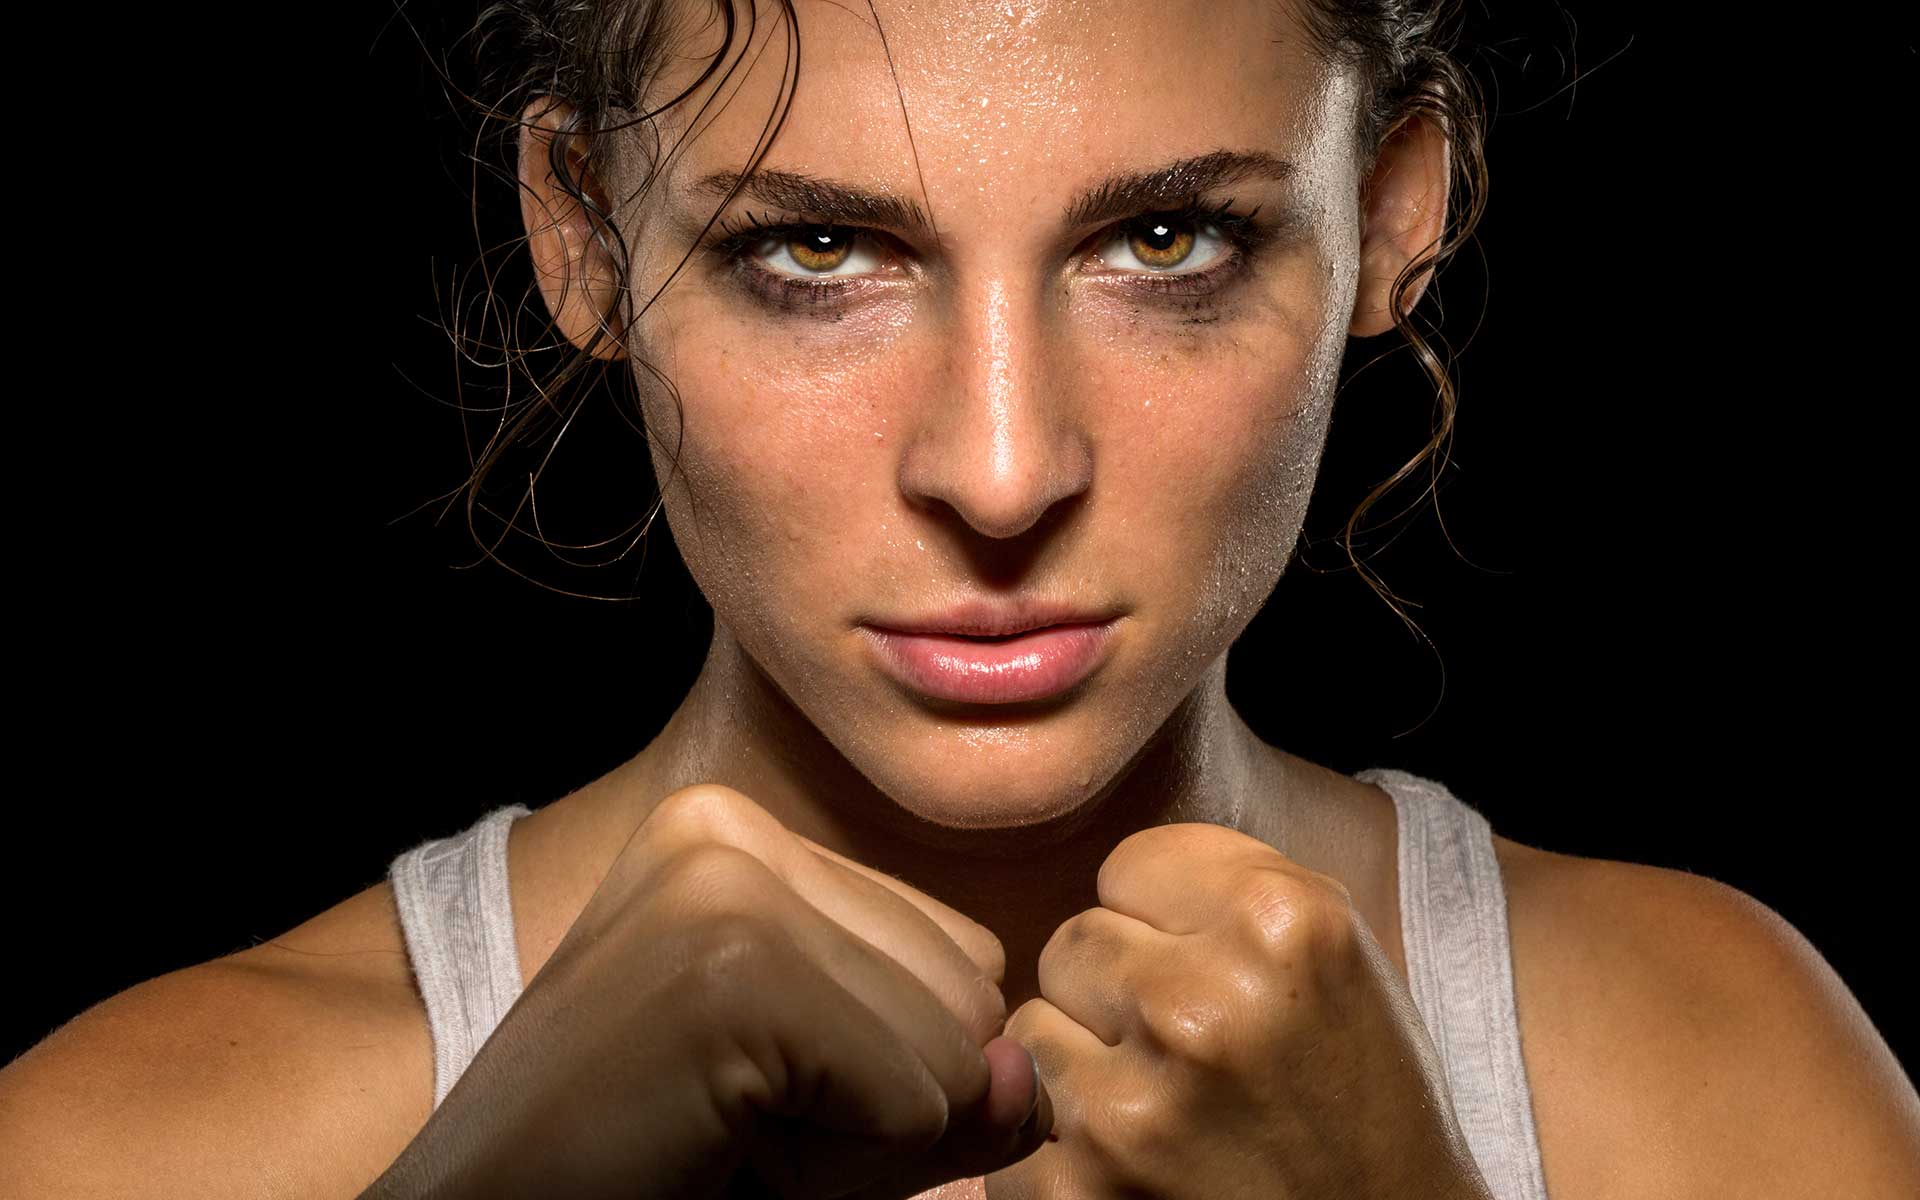 What Are the Differences Between Assault and Self-Defense?